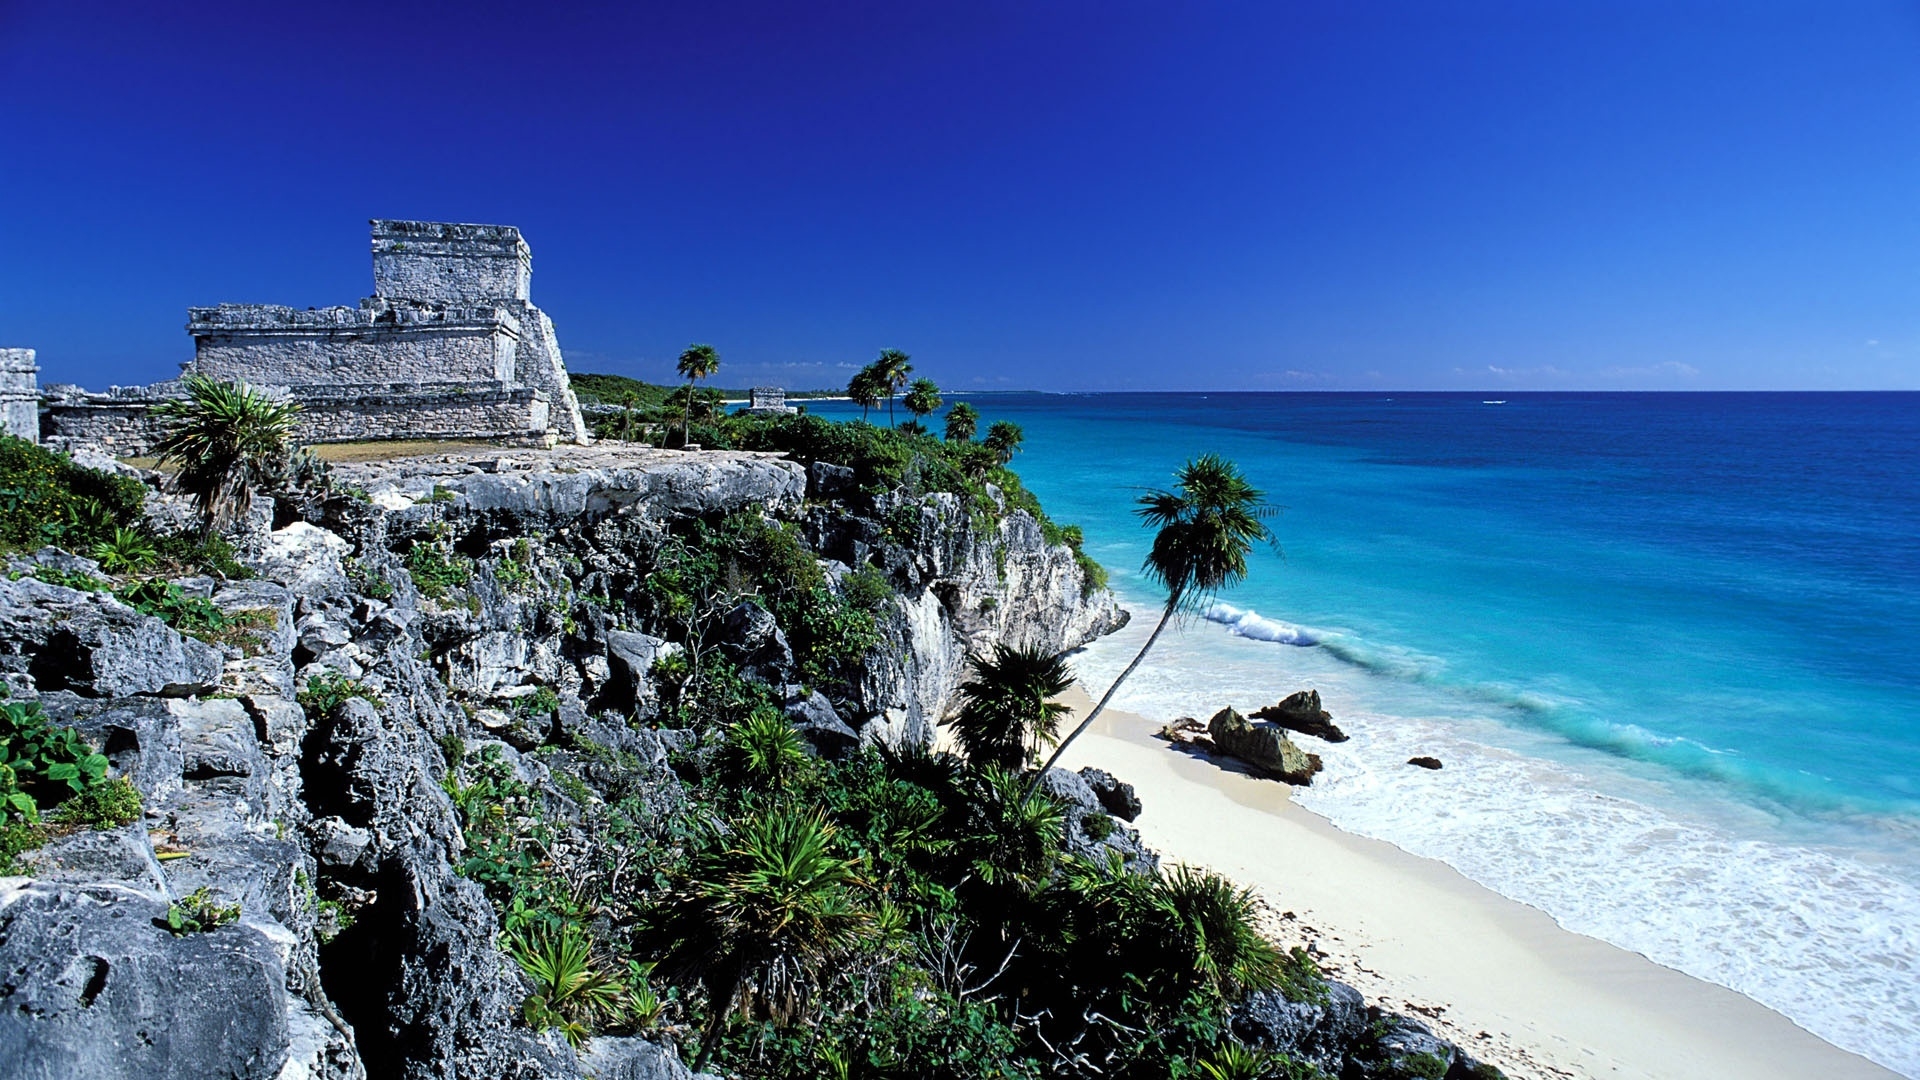 Tulum Mexico Summer for 1920 x 1080 HDTV 1080p resolution